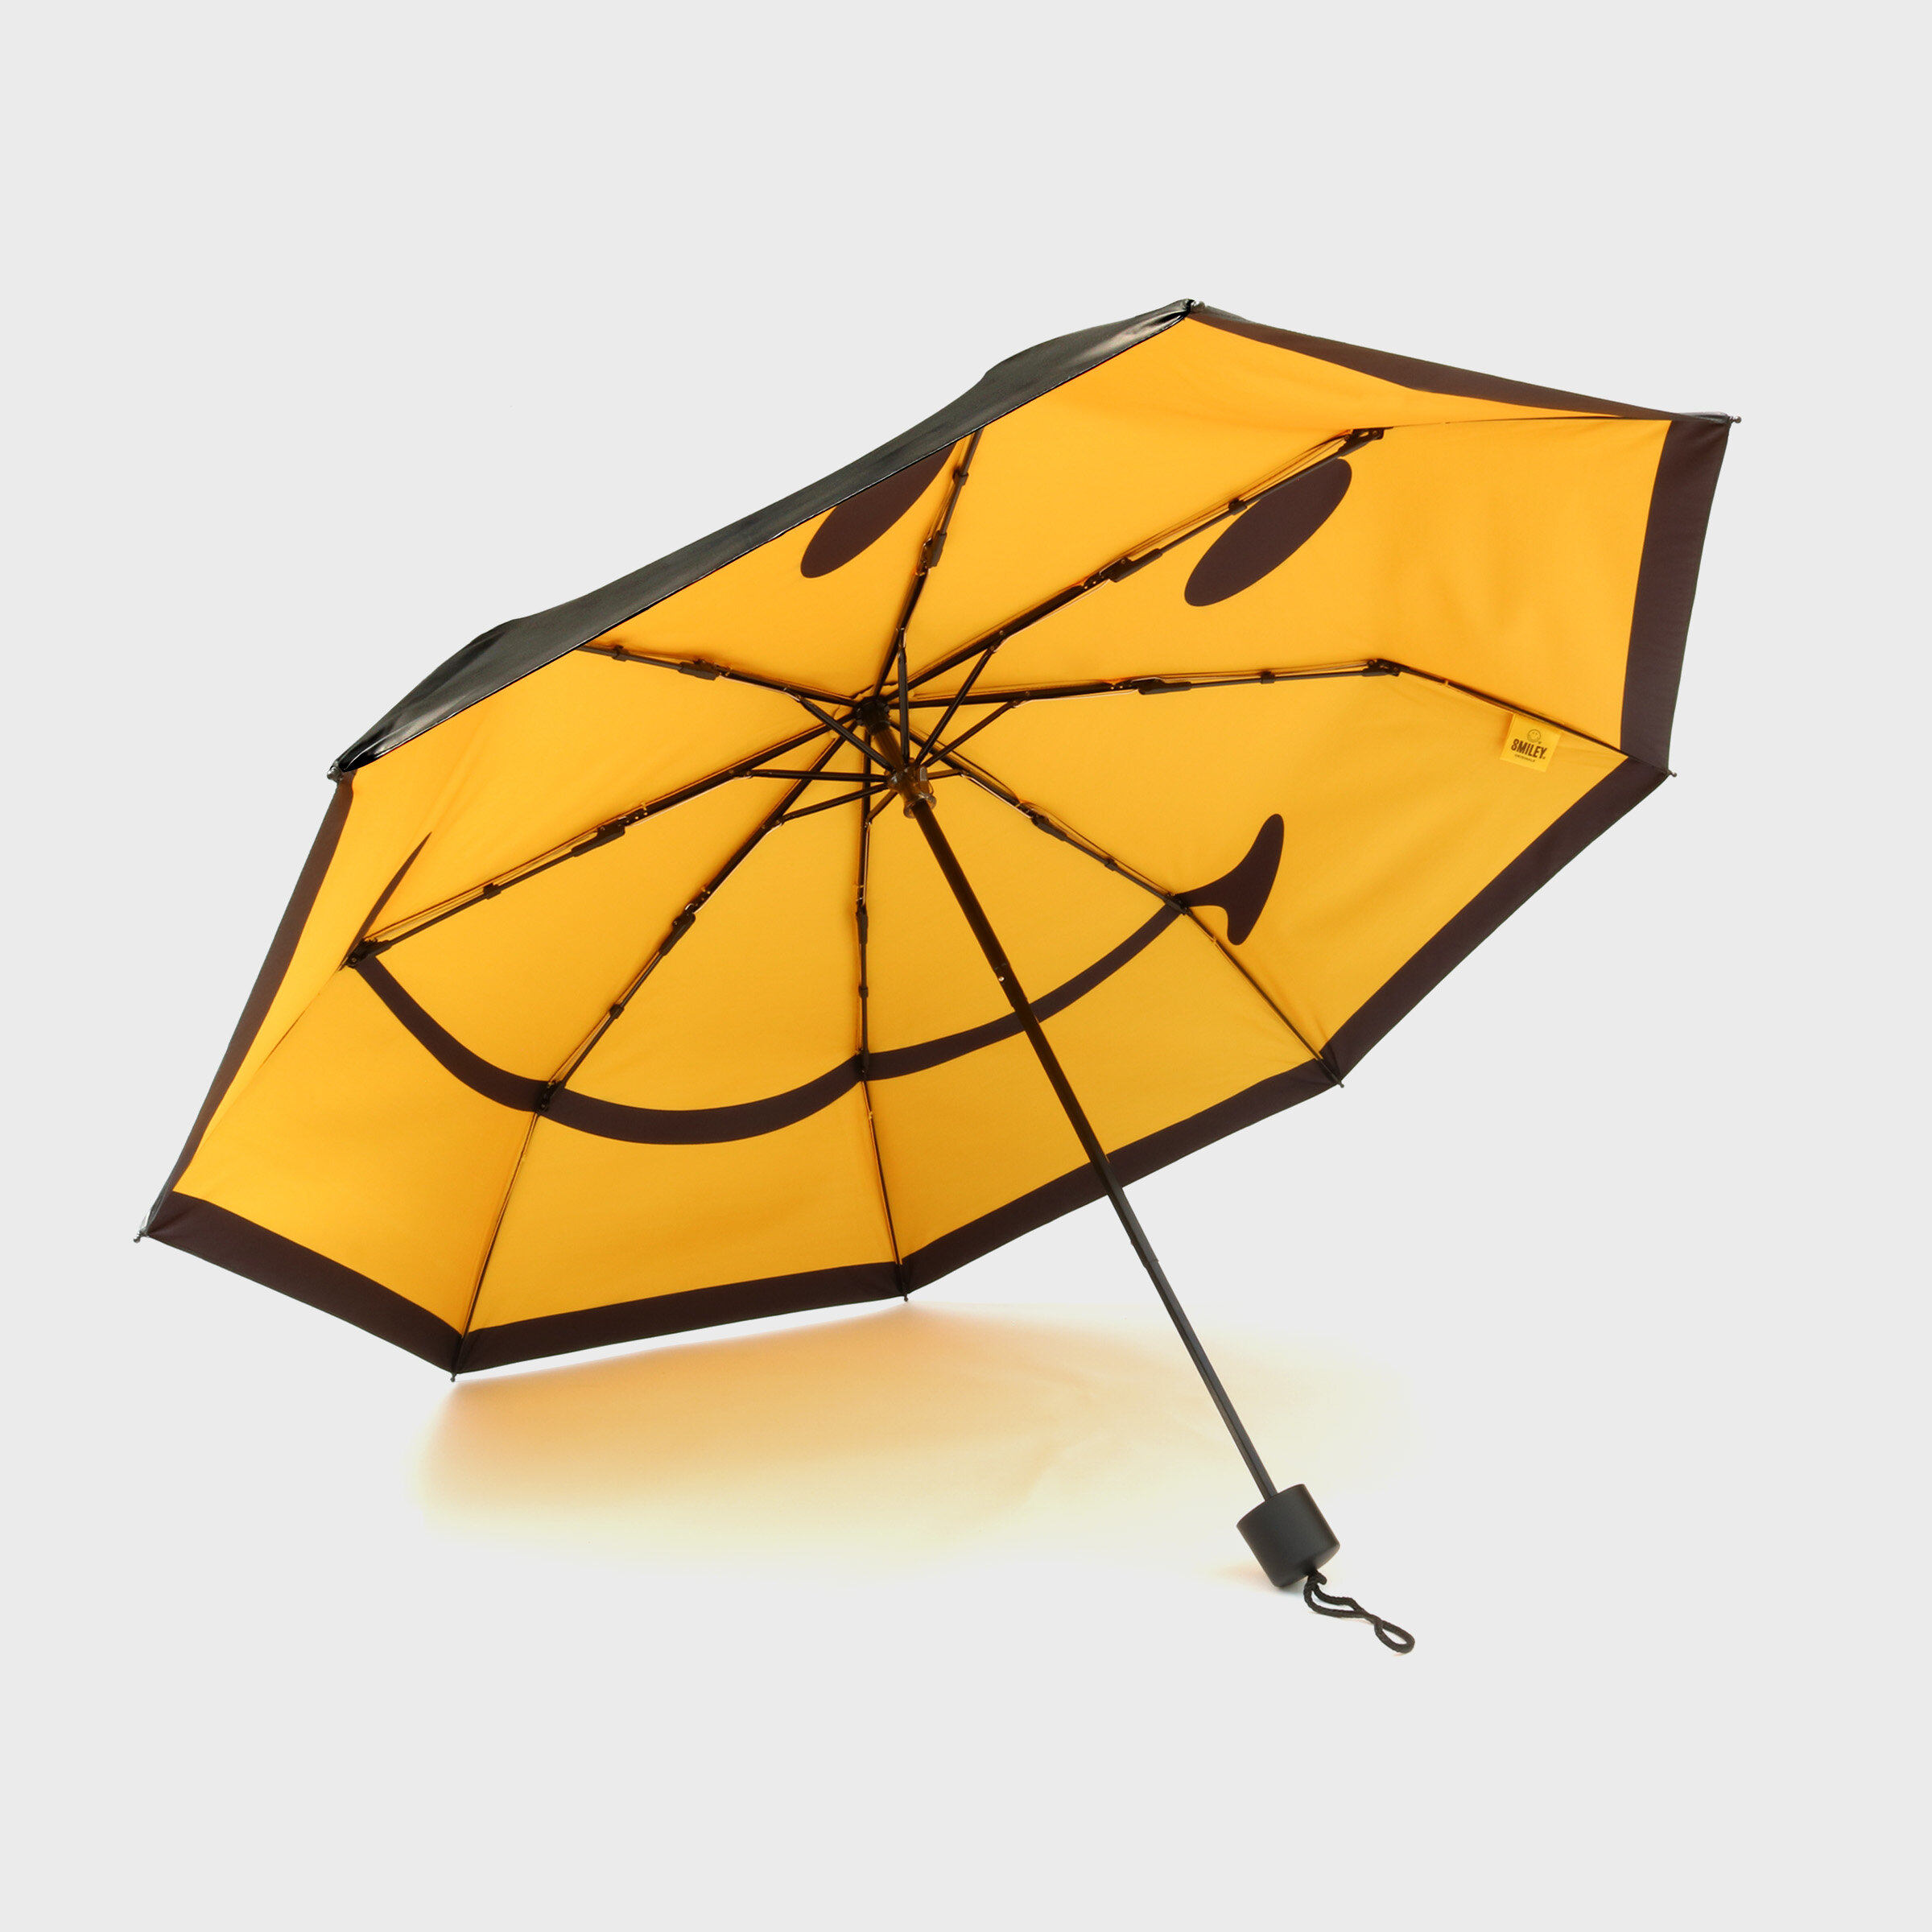 Umbrella In partnership with The Smiley Company